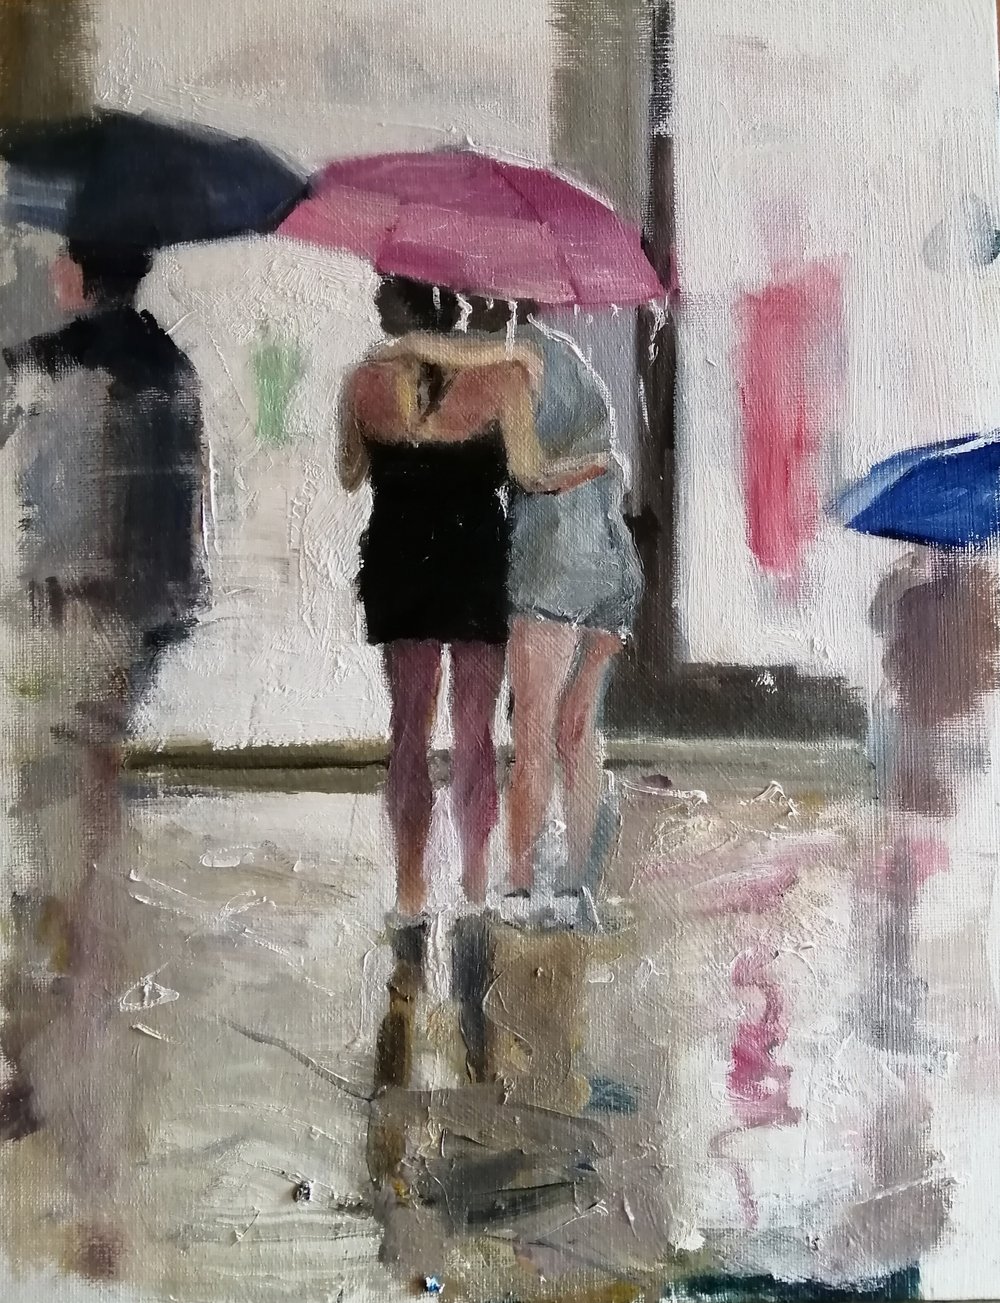  Umbrellas  2022  Oil on board  26x31cm  £400  An impressionist painting of two women caught in the rain, huddling under an umbrella. The back lighting from the shops and the semi abstract gestural treatment of the wet pavement add drama and colour t